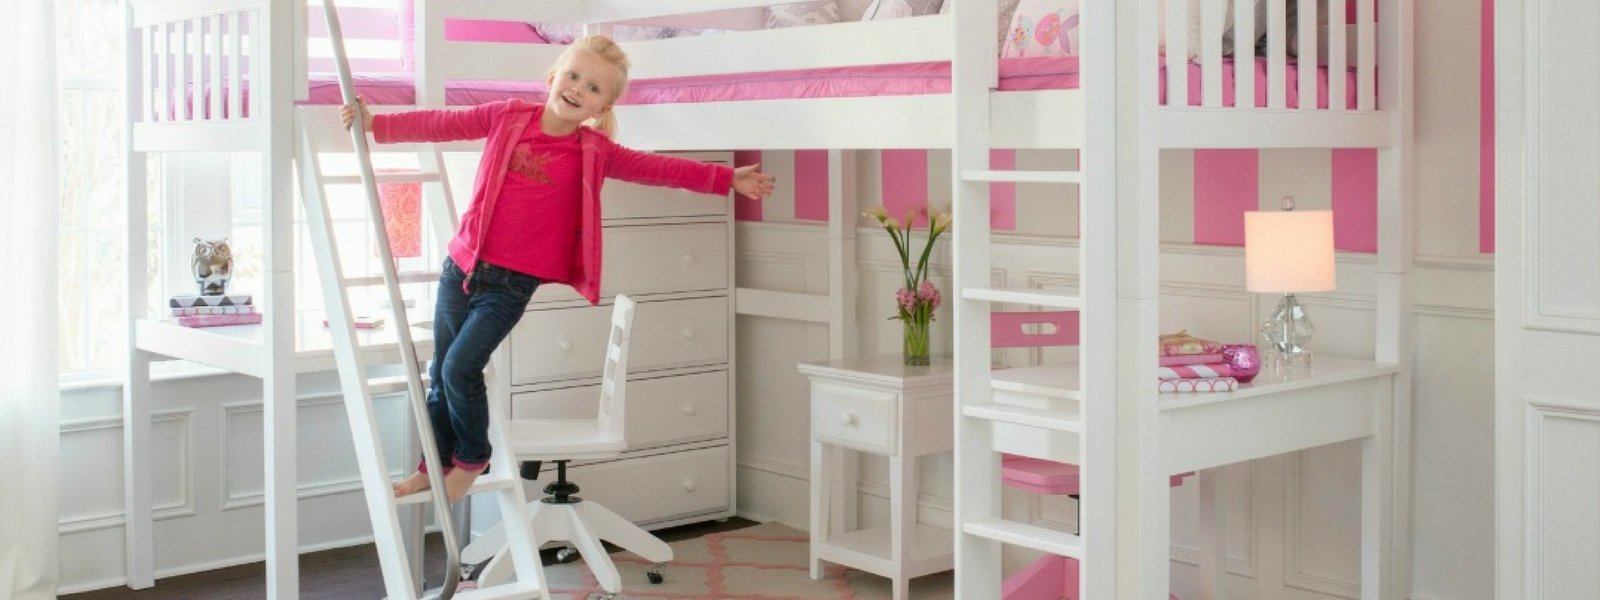 Look Whats Back in Stock - Popular Bunk Beds & Loft Beds